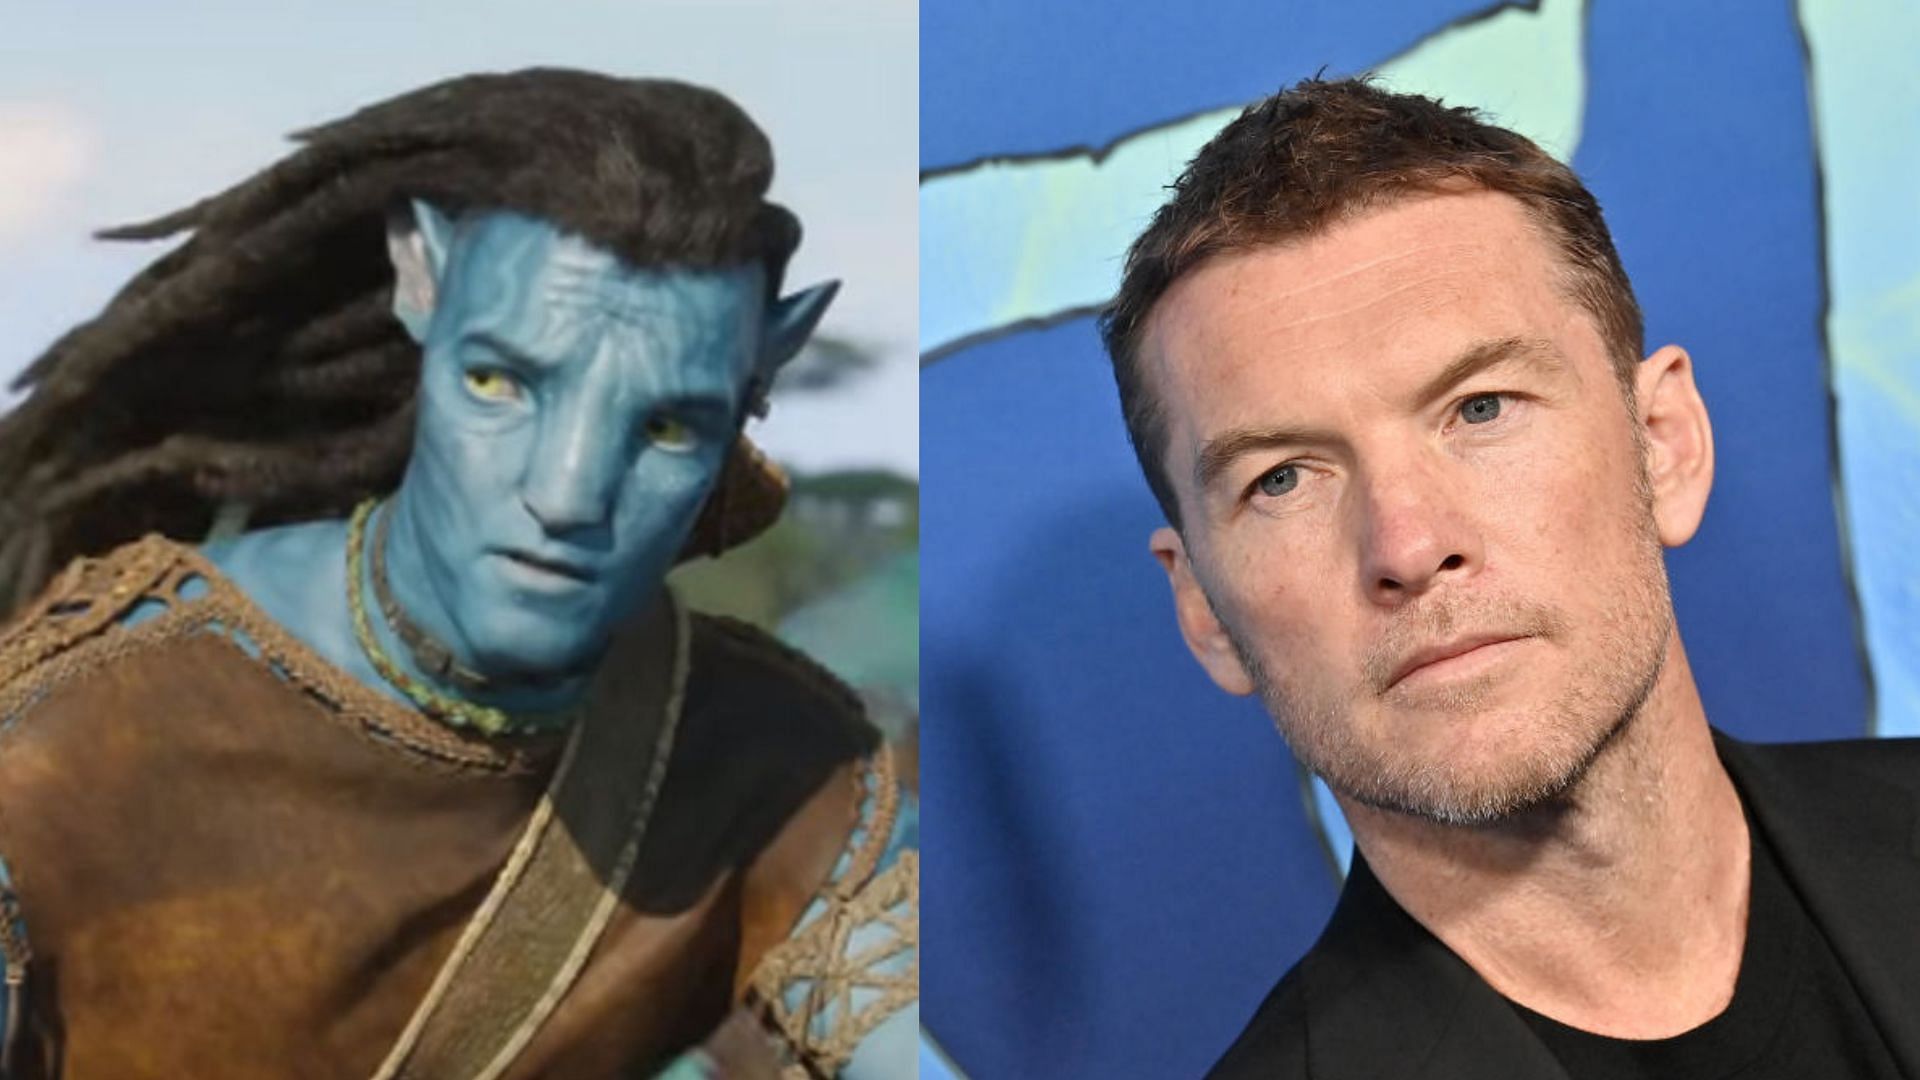 Who Is Jake Sully from Avatar Everything to Know about the Character and  Actor Who Portrays the Role